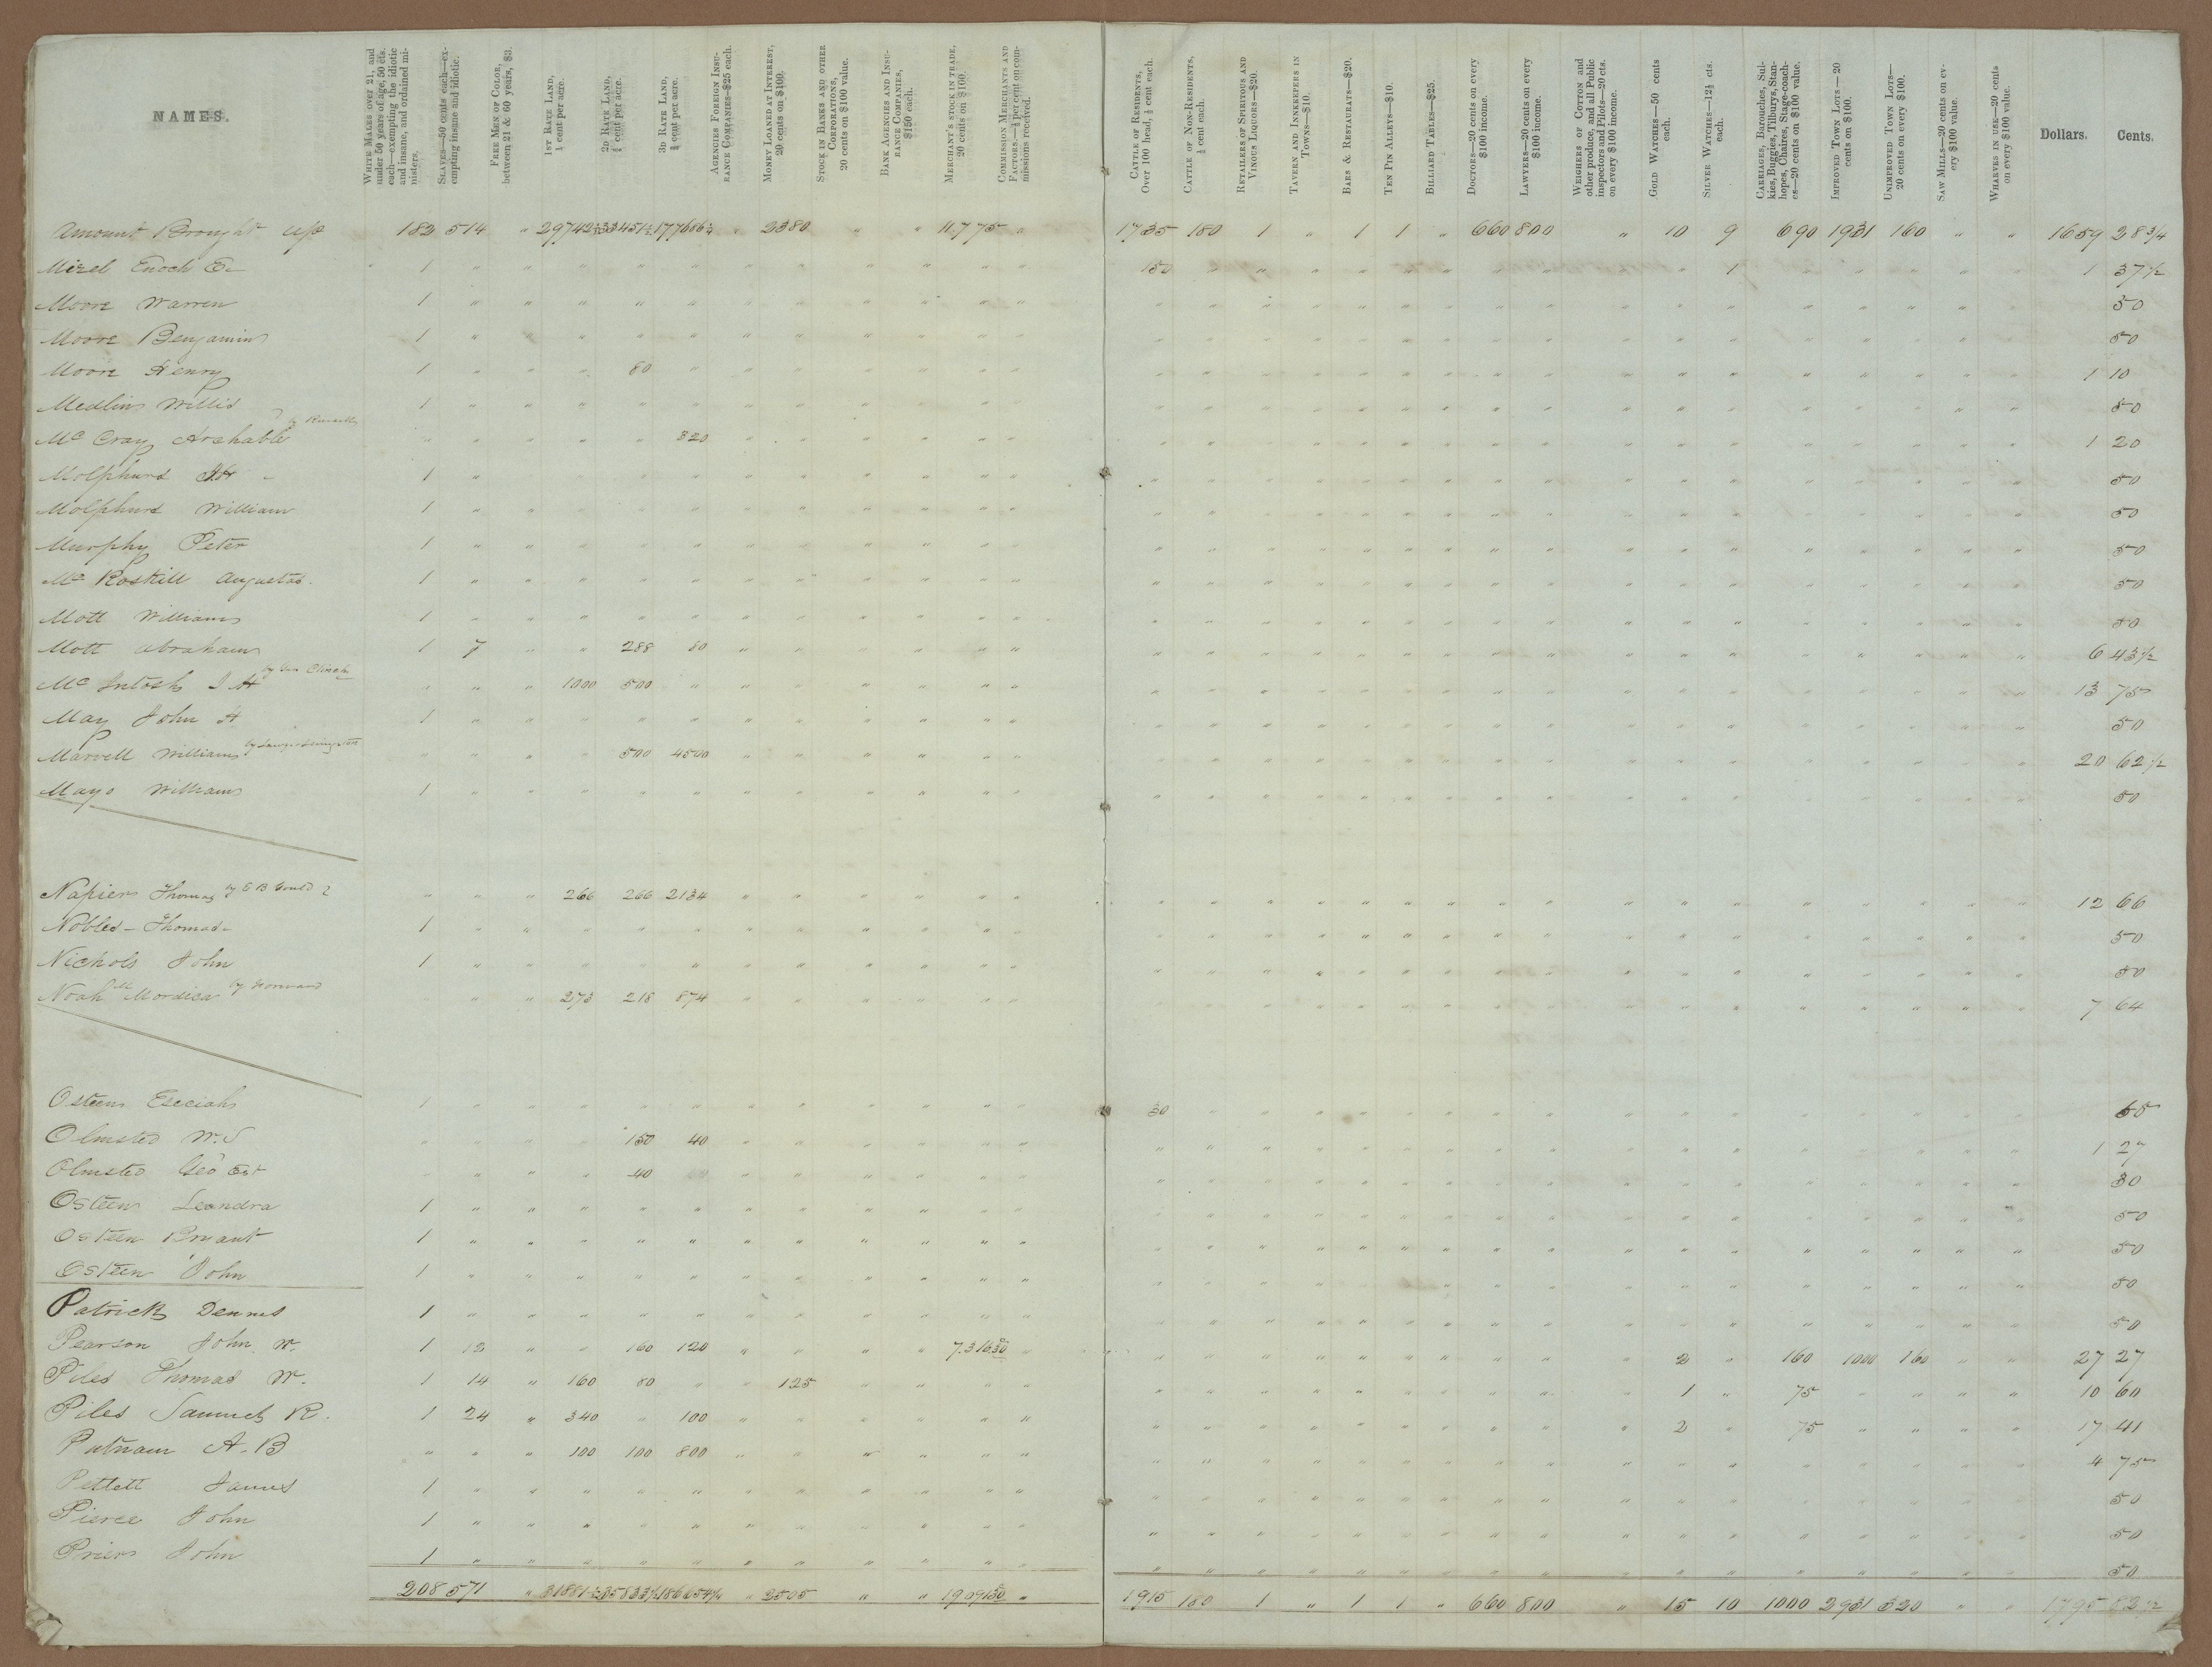 Florida County Tax Rolls, 1846 and 1847